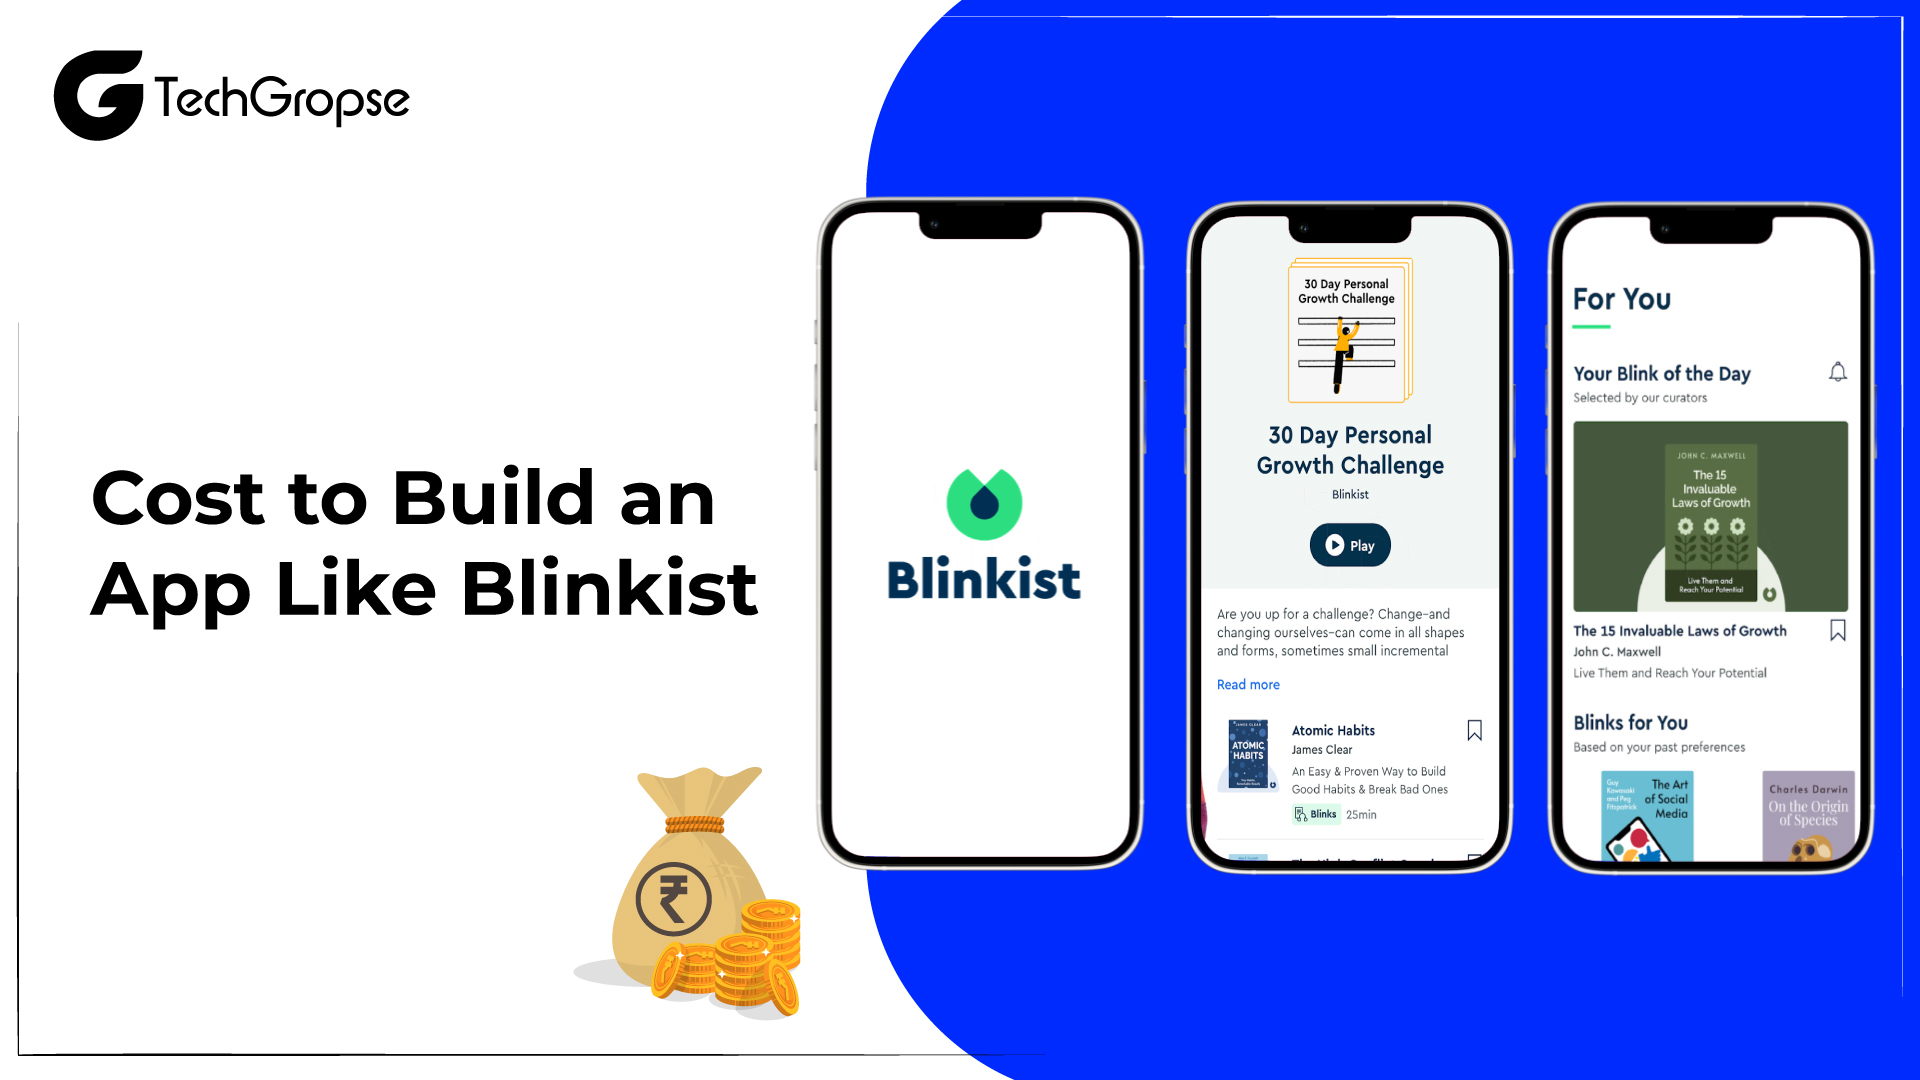 Cost to Build an App Like Blinkist